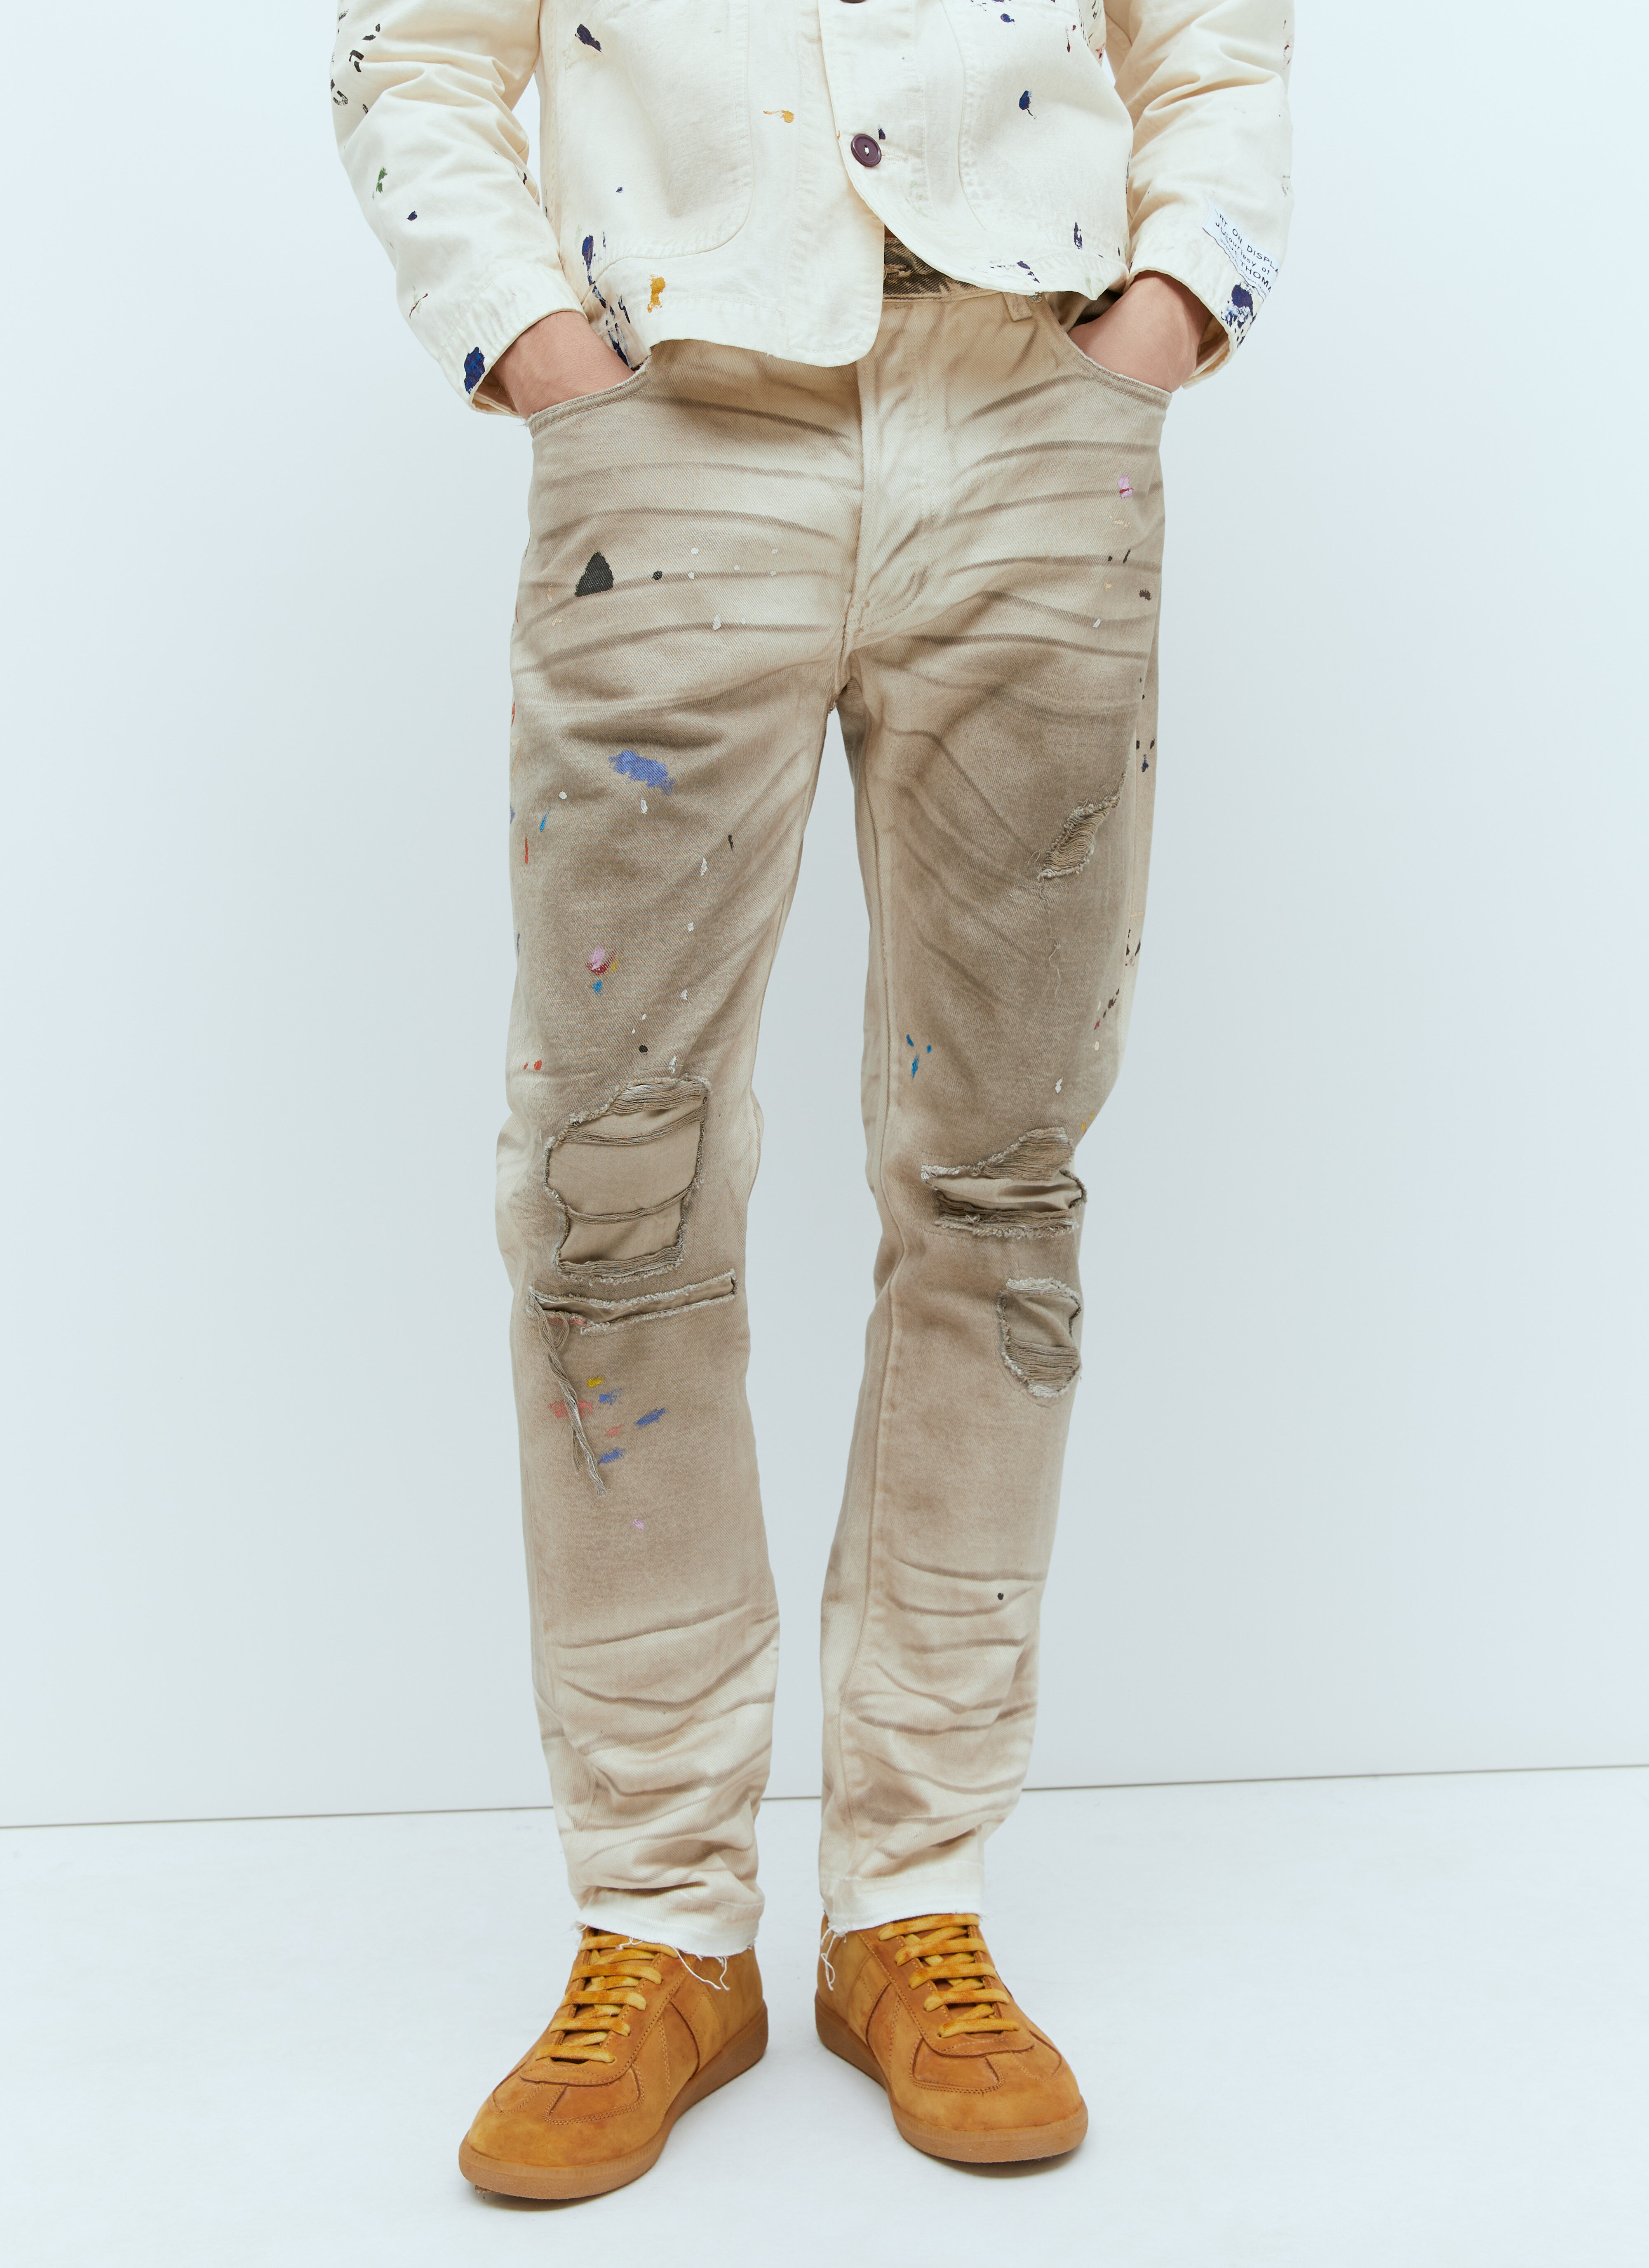 Acne Studios Hollywood BLV 5001 Jeans ブラウン acn0156009